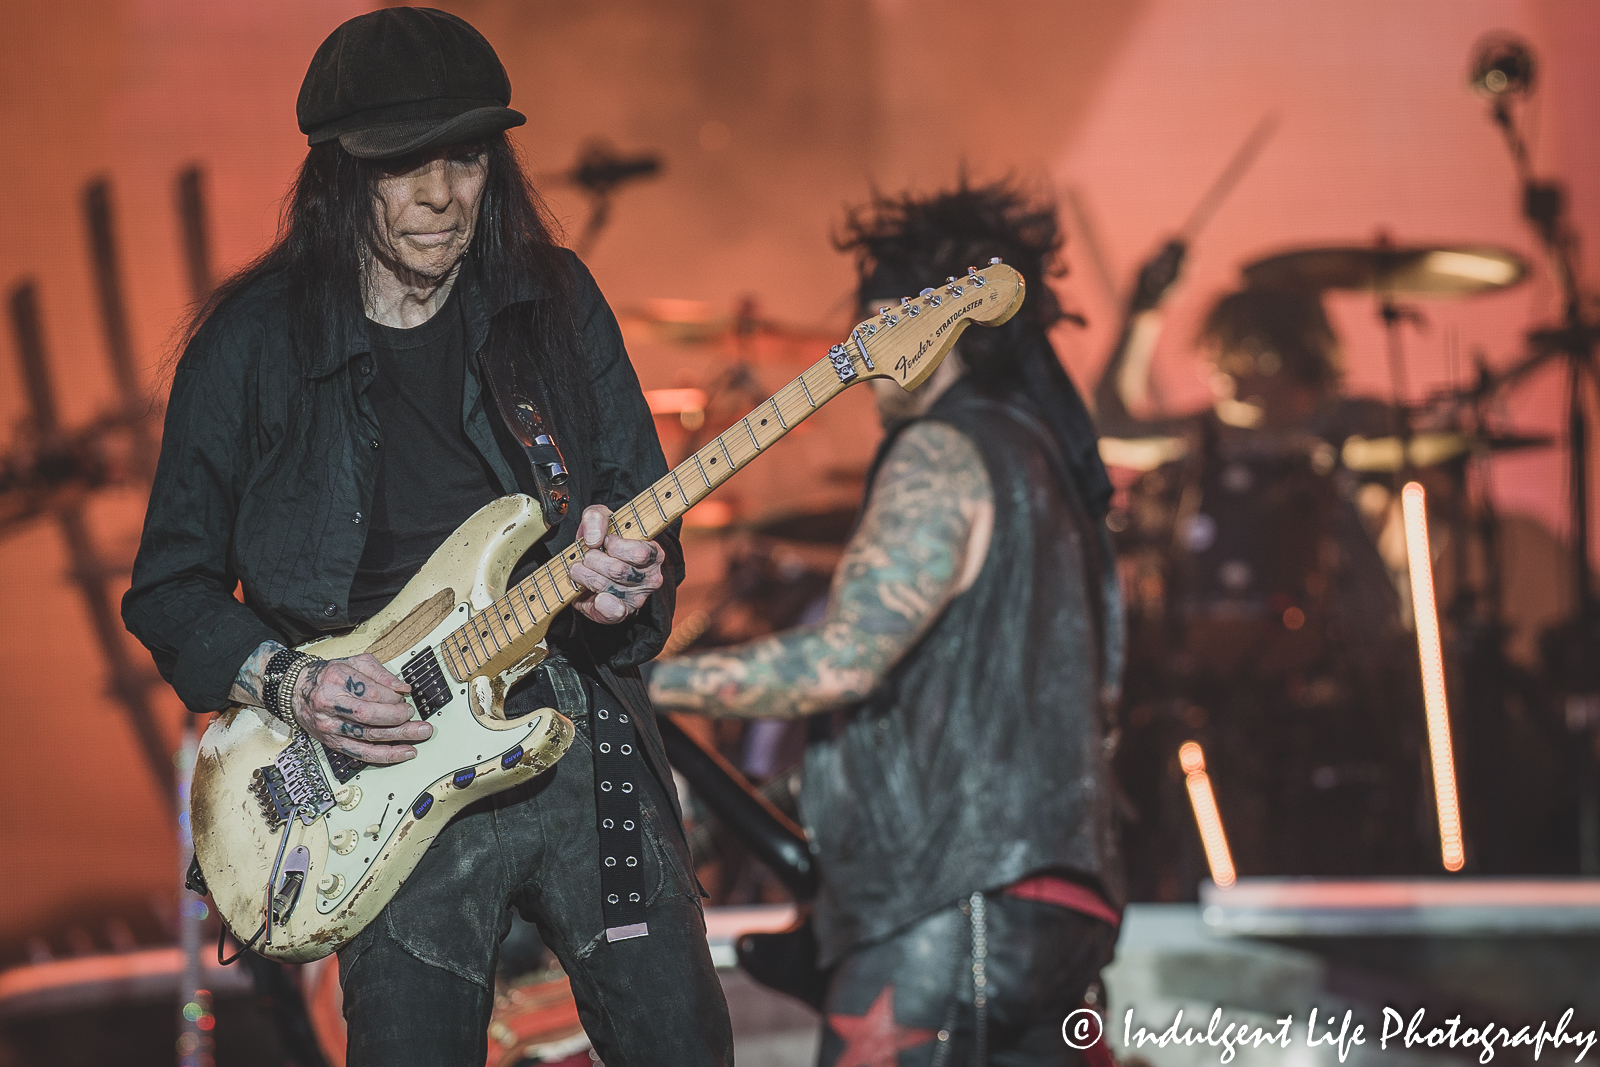 Guitarist Mick Mars of Mötley Crüe live in concert during the stadium tour stop at Kauffman Stadium in Kansas City, MO on July 19, 2022.